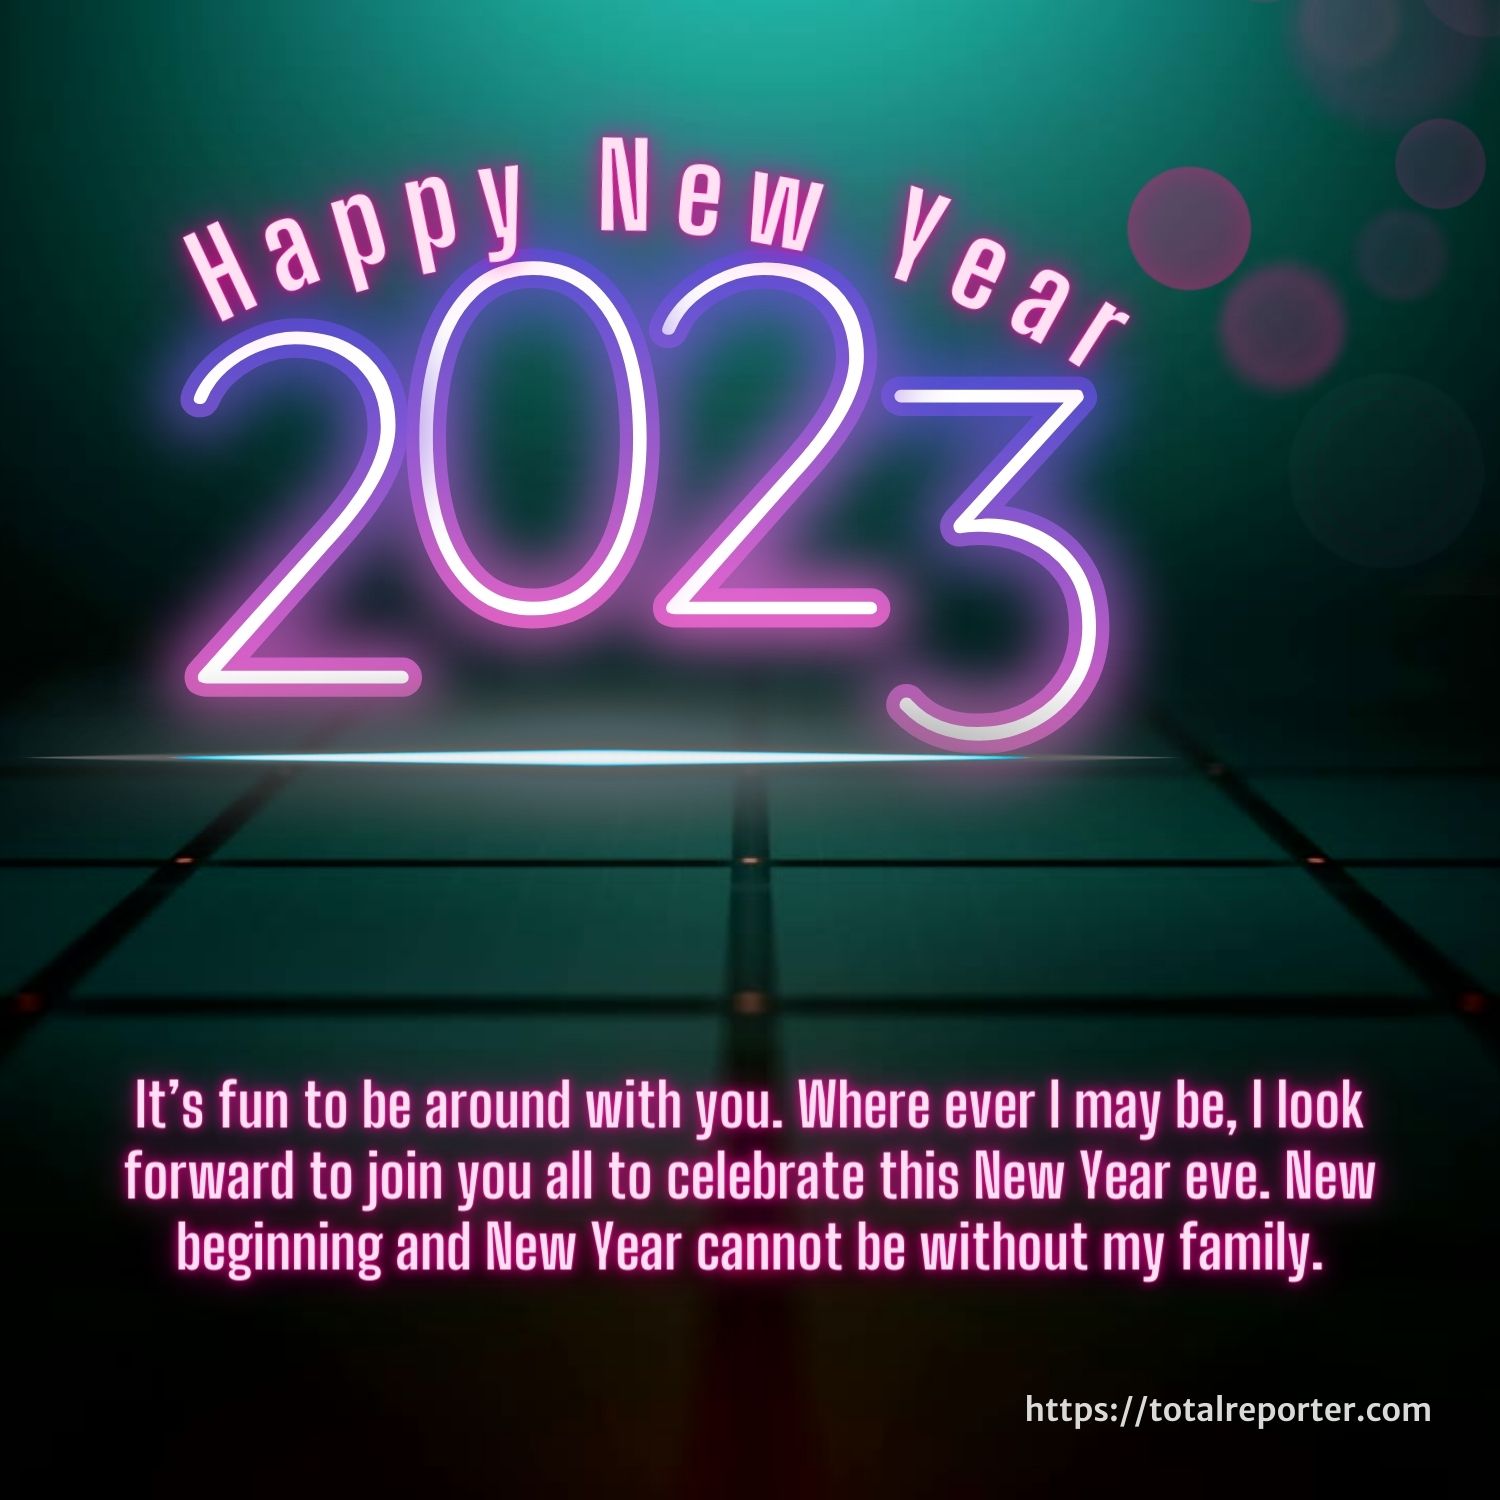 Happy New Year 2023 Images for Twitter